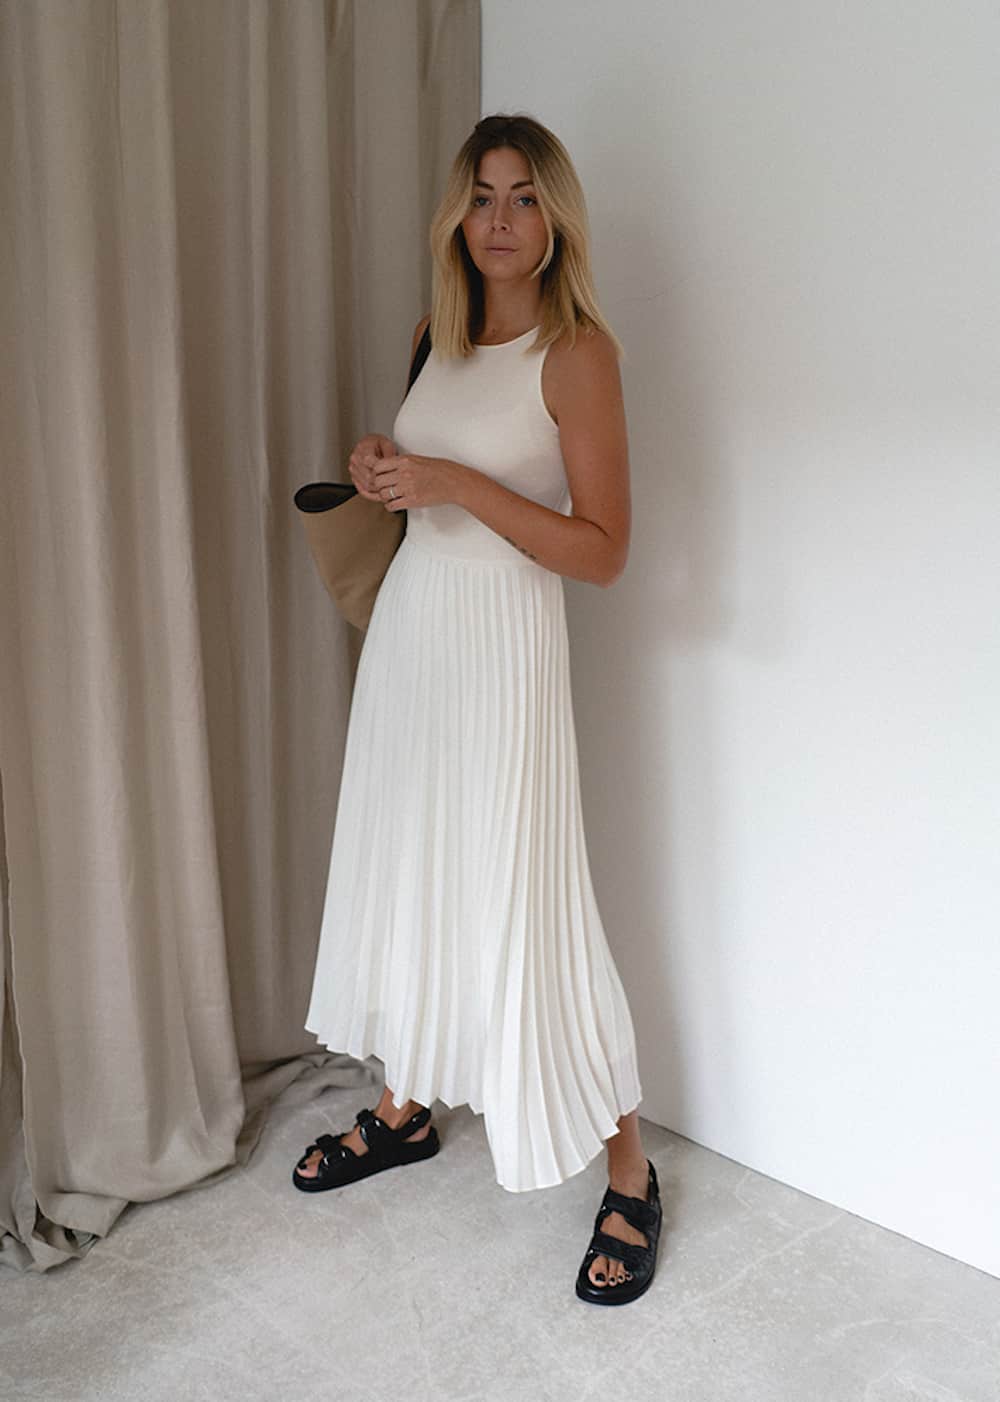 image of a woman in a pleated white tank dress and black chunky sandals